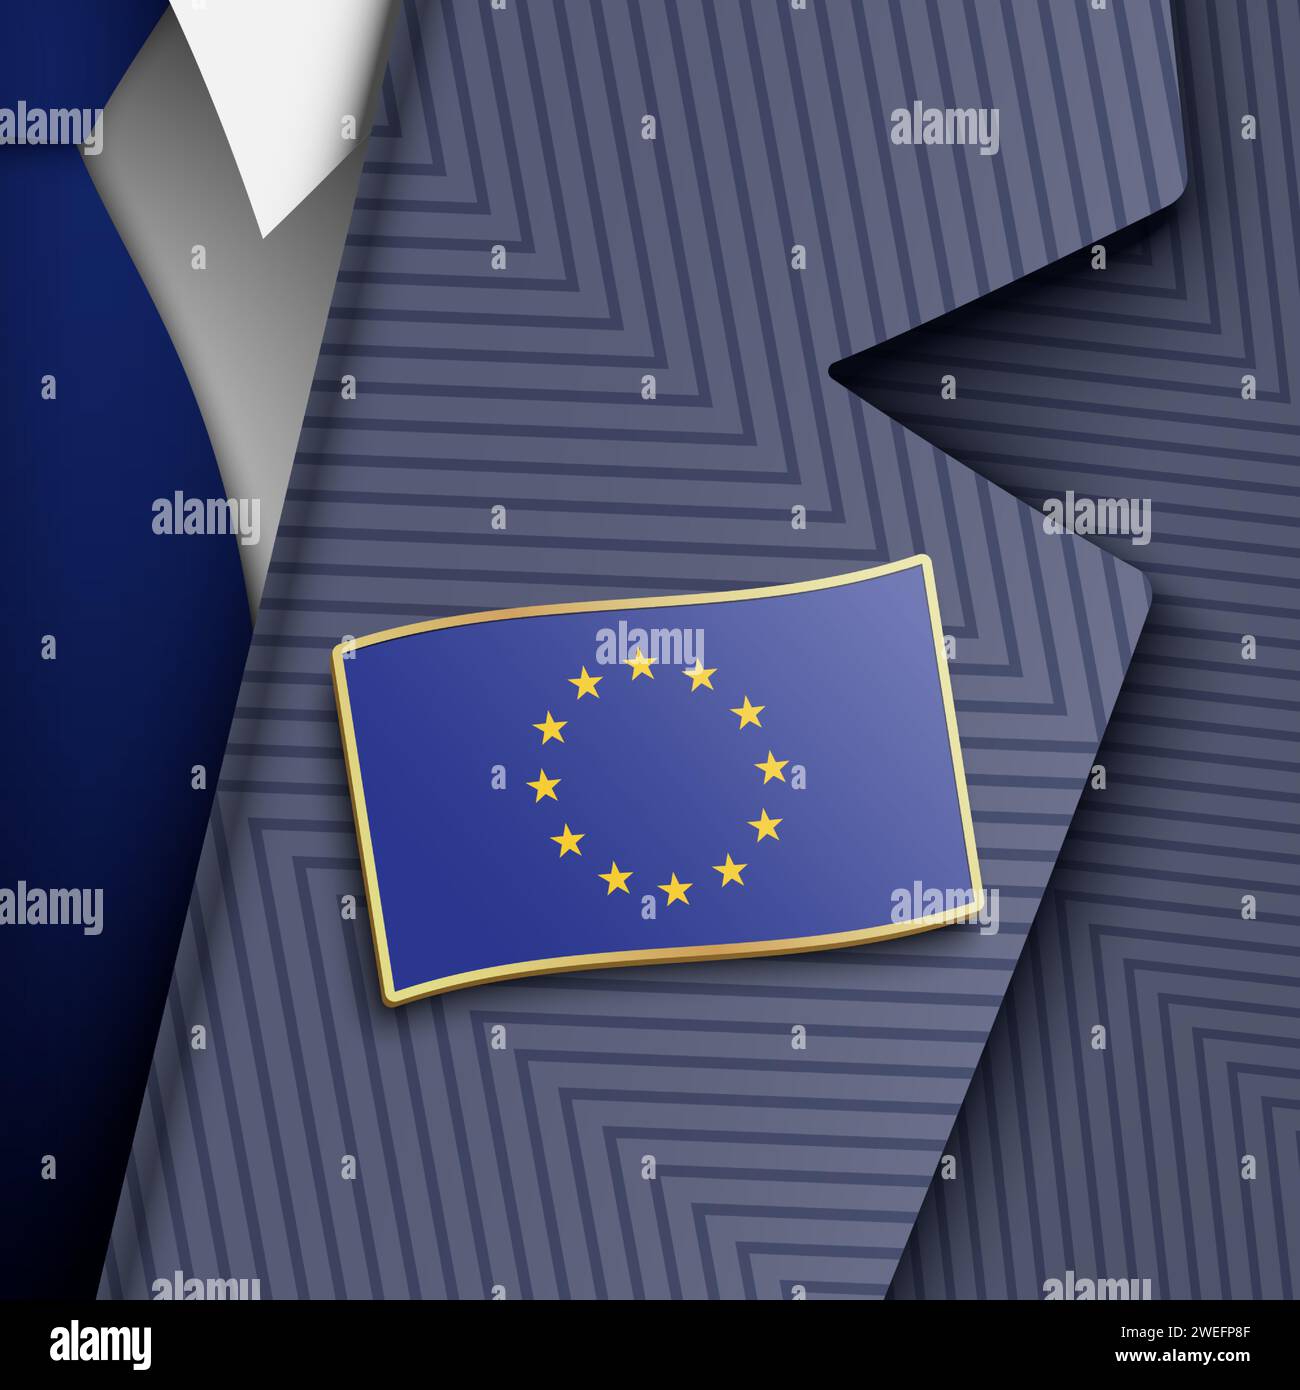 EU official dressed in a blue suit and tie, wearing EU flag lapel pin, vector illustration. Stock Vector